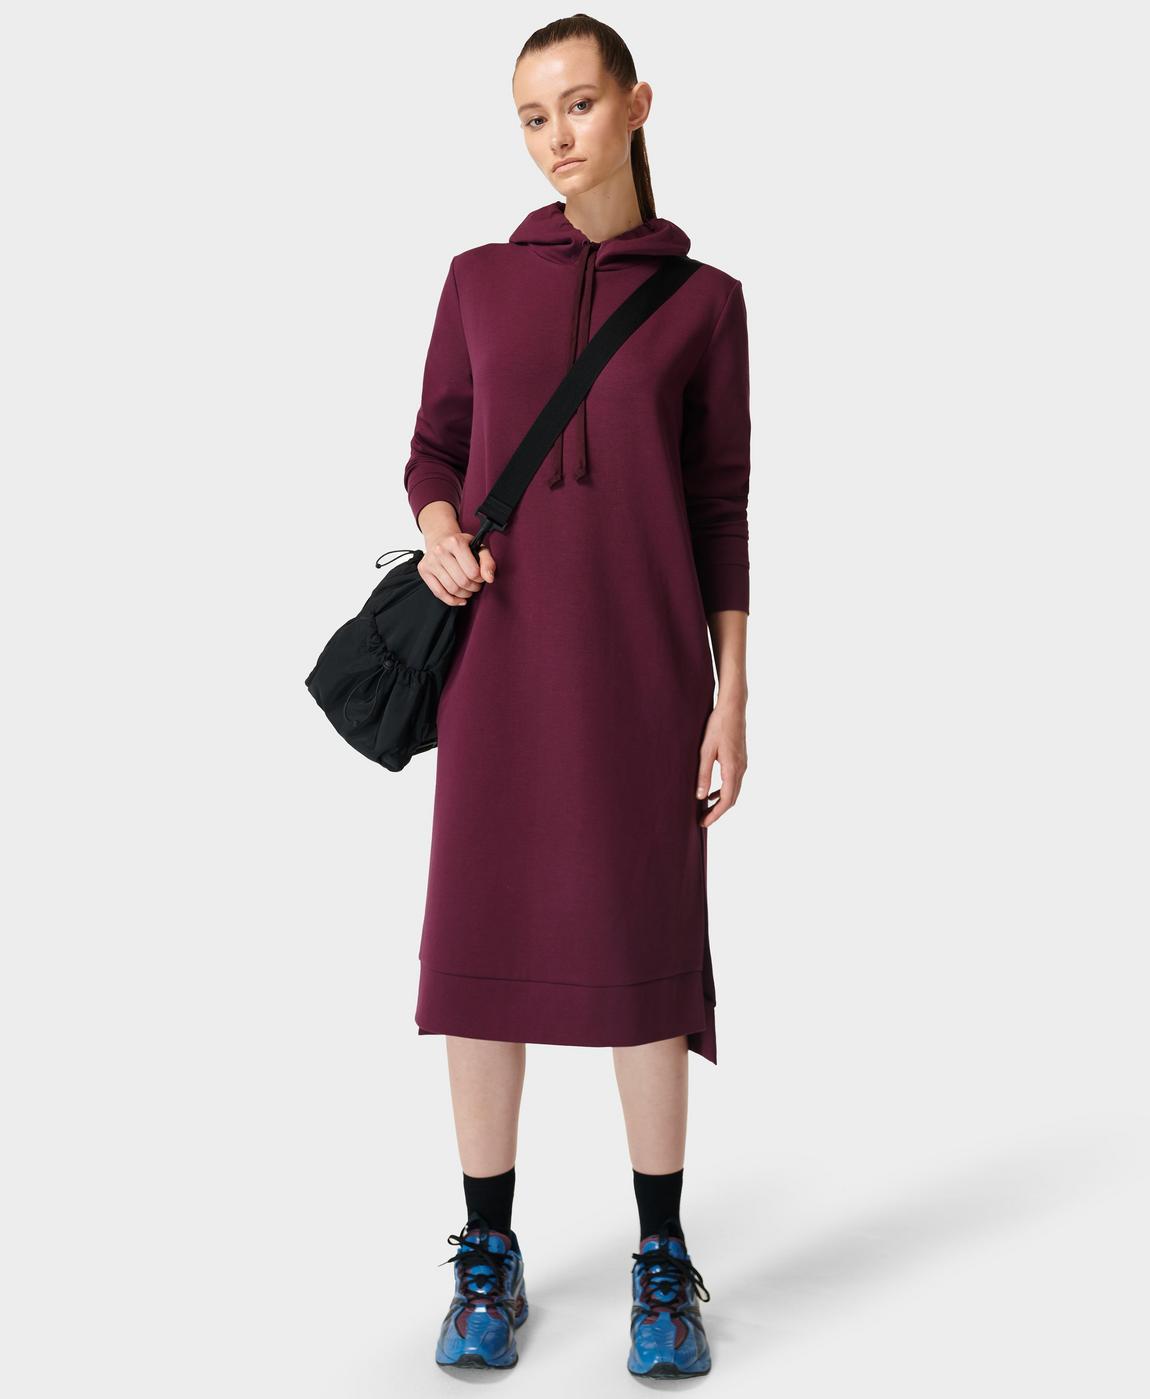 Beyond Hooded Sweat Dress - plumred | Women's Dresses and